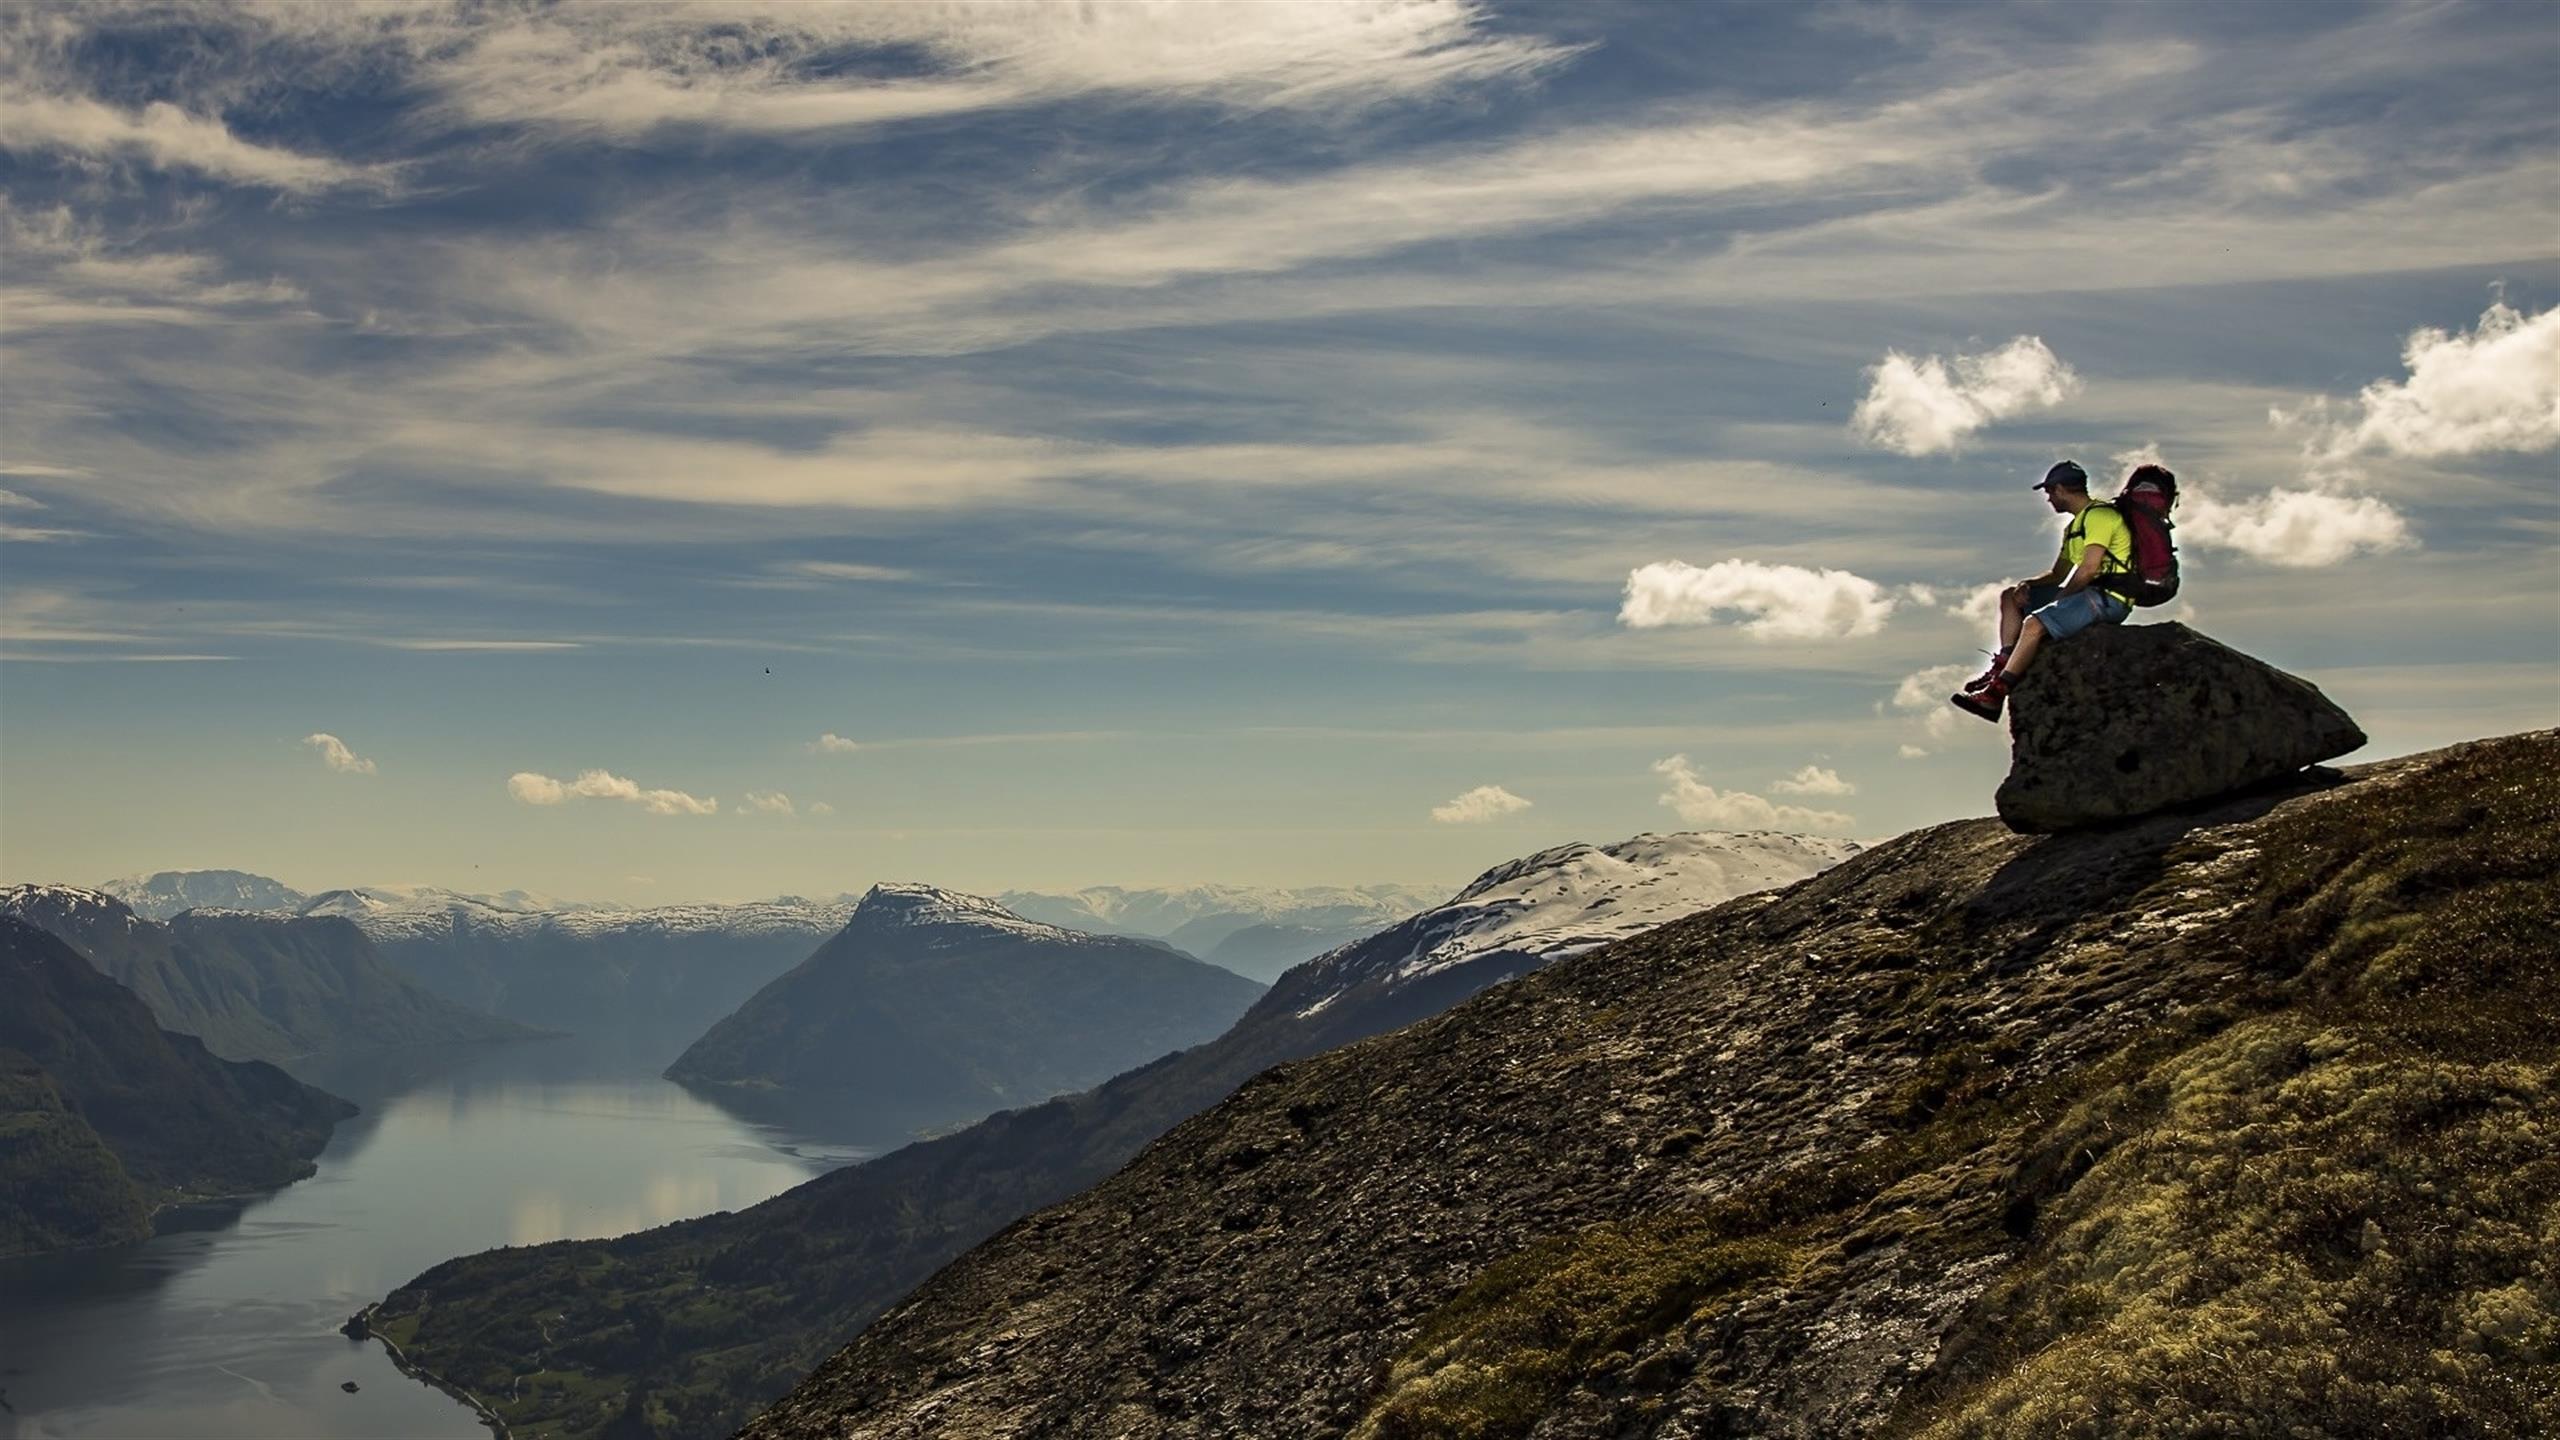 A person sitting on a rock and looking at the view over the fjords and mountains.